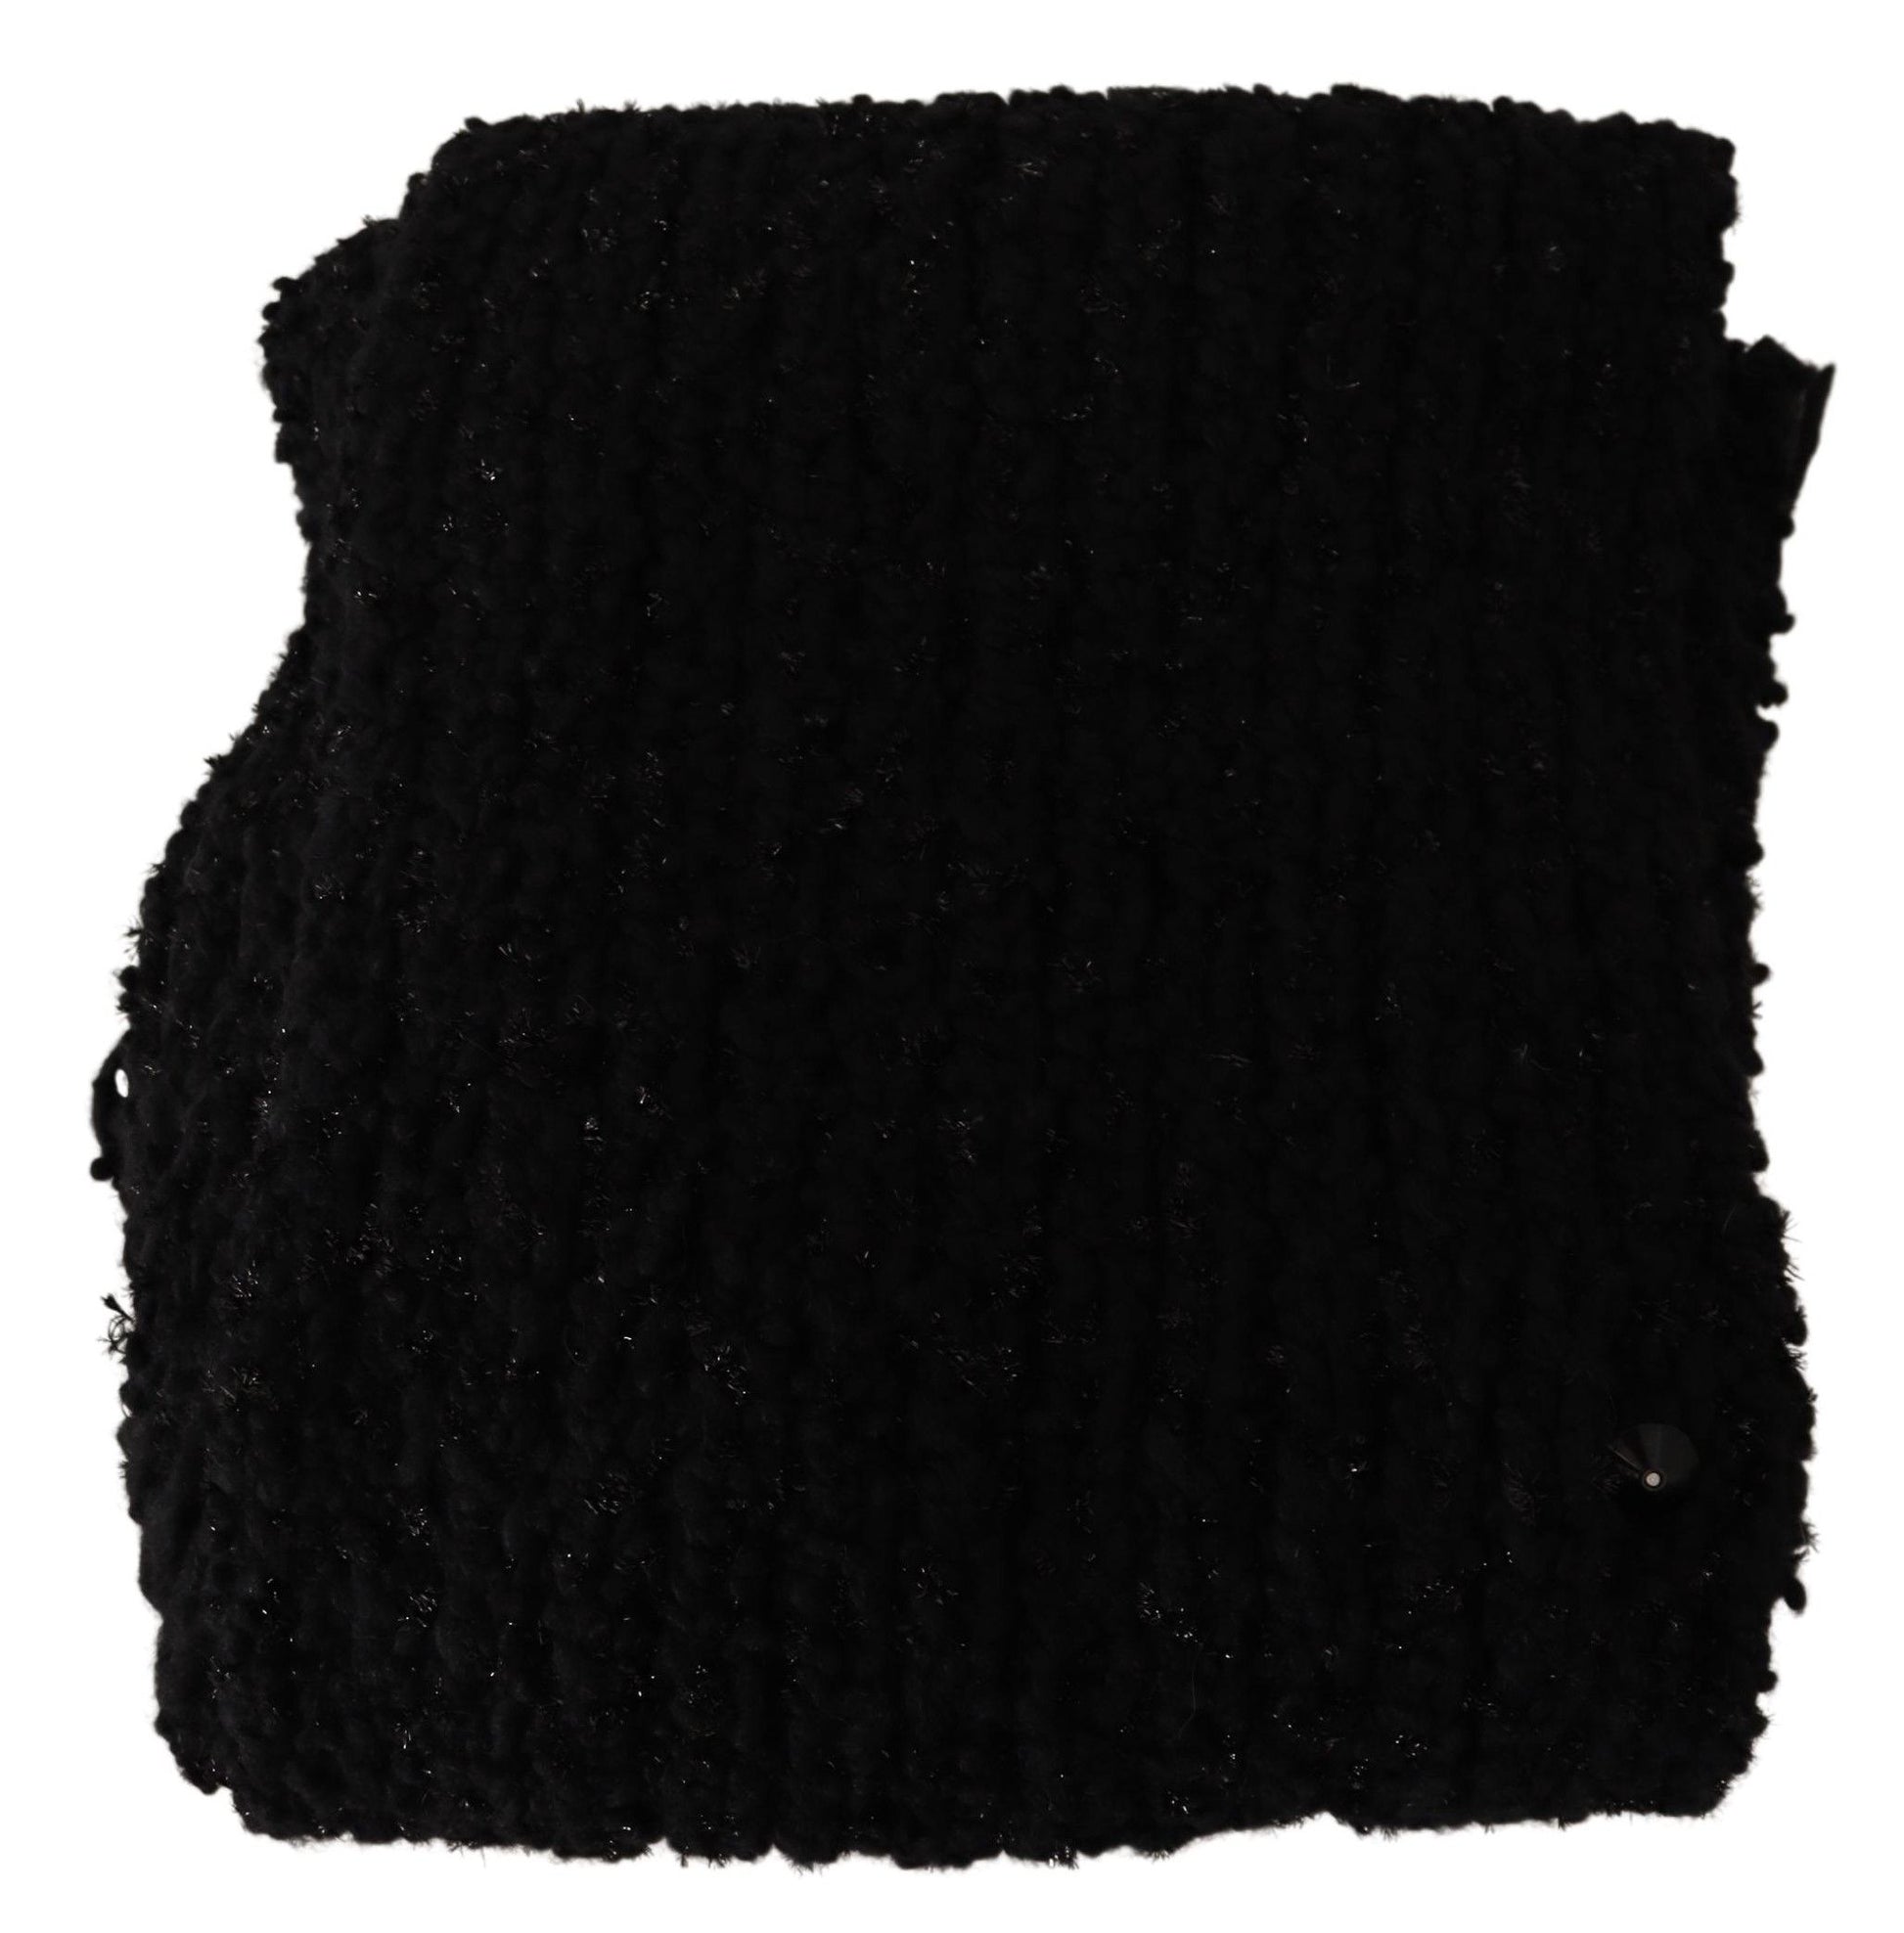 Black Virgin Wool Knitted Wrap Shawl Scarf - Designed by Dolce & Gabbana Available to Buy at a Discounted Price on Moon Behind The Hill Online Designer Discount Store